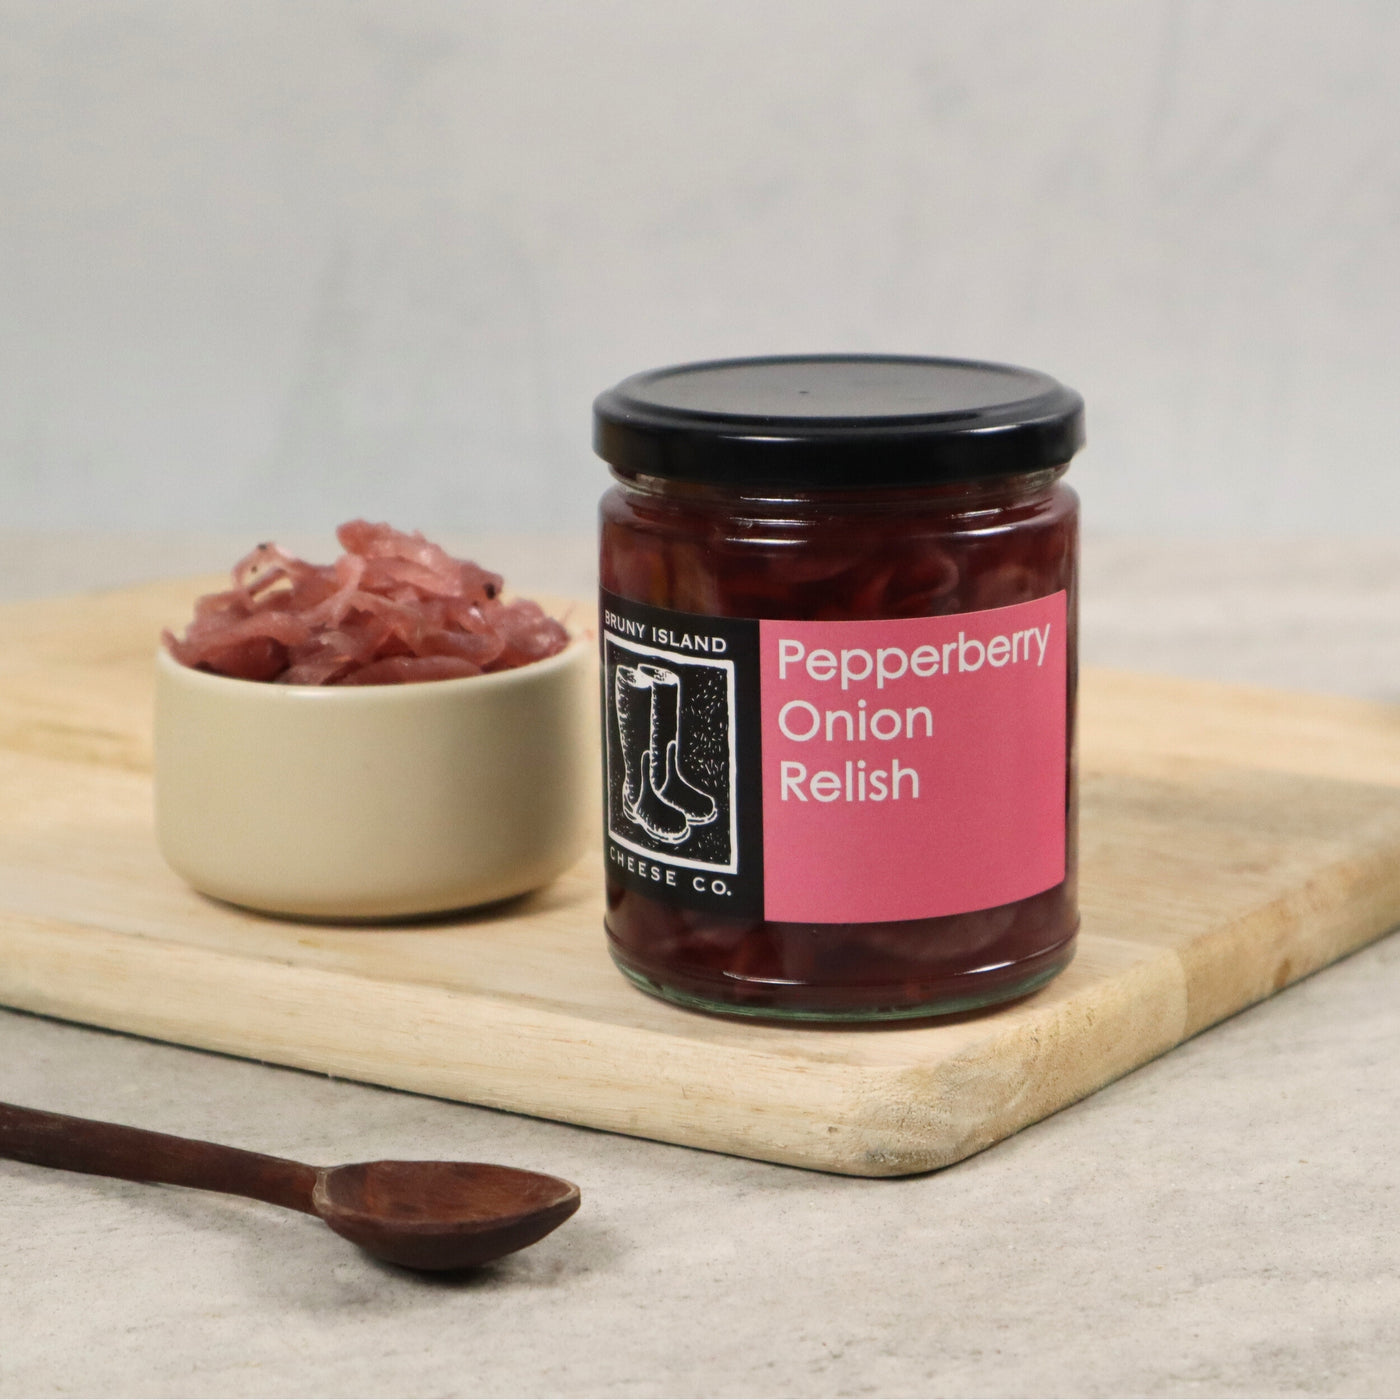 Our Pepperberry Onion Relish